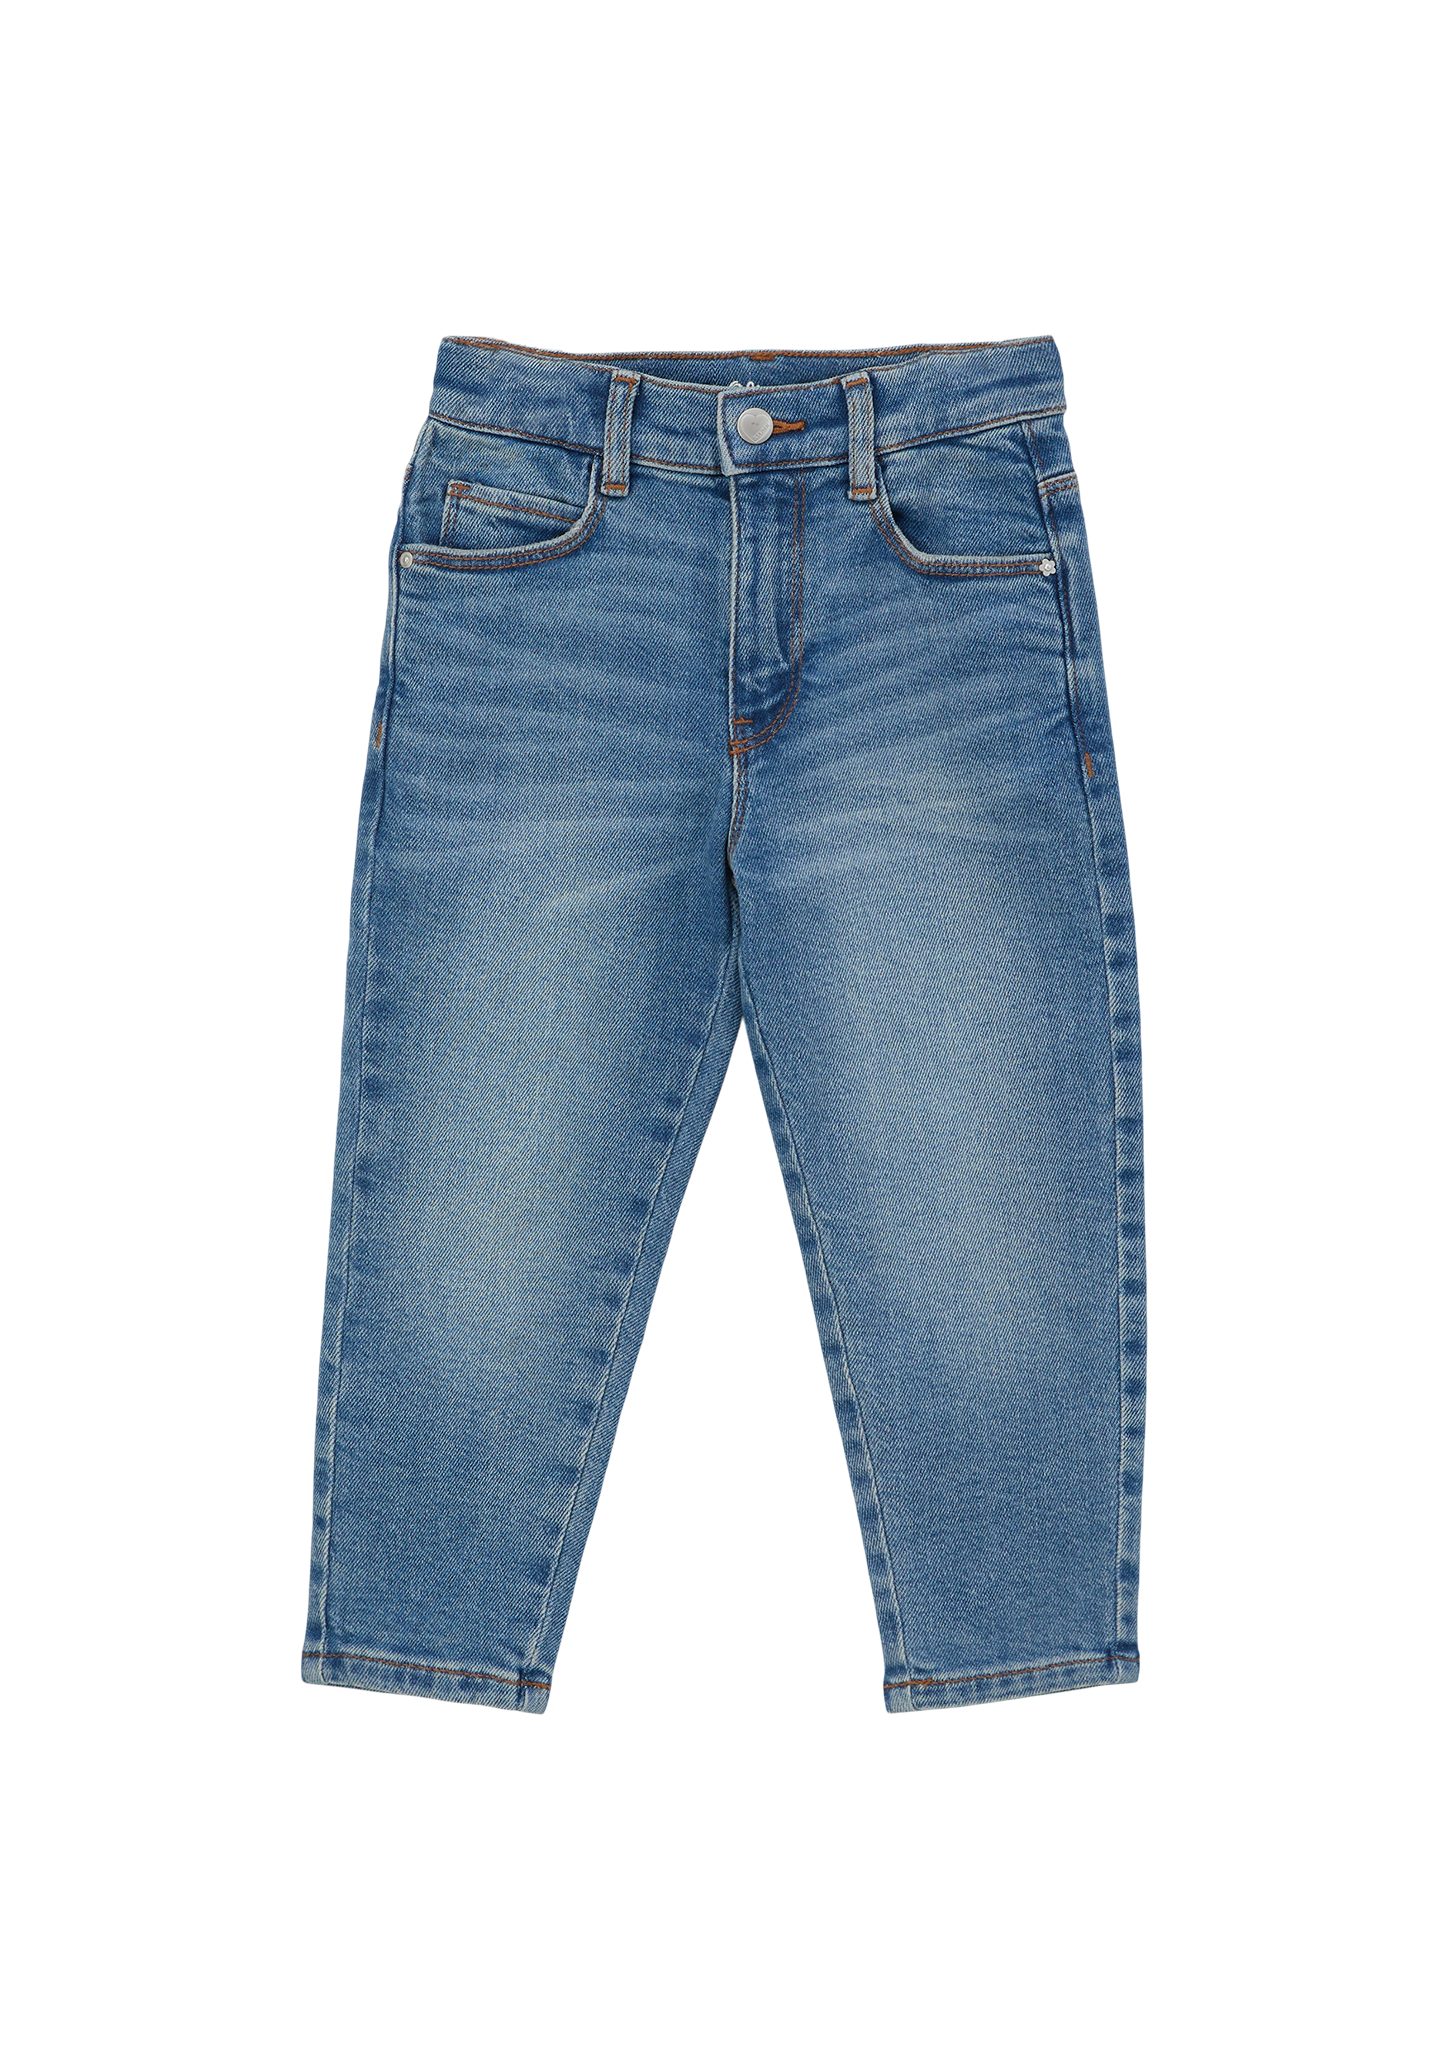 Stoffhose / Kontrastnähte Ankle-Jeans Tapered / Fit s.Oliver Waschung, Leg High Mom Rise / Relaxed